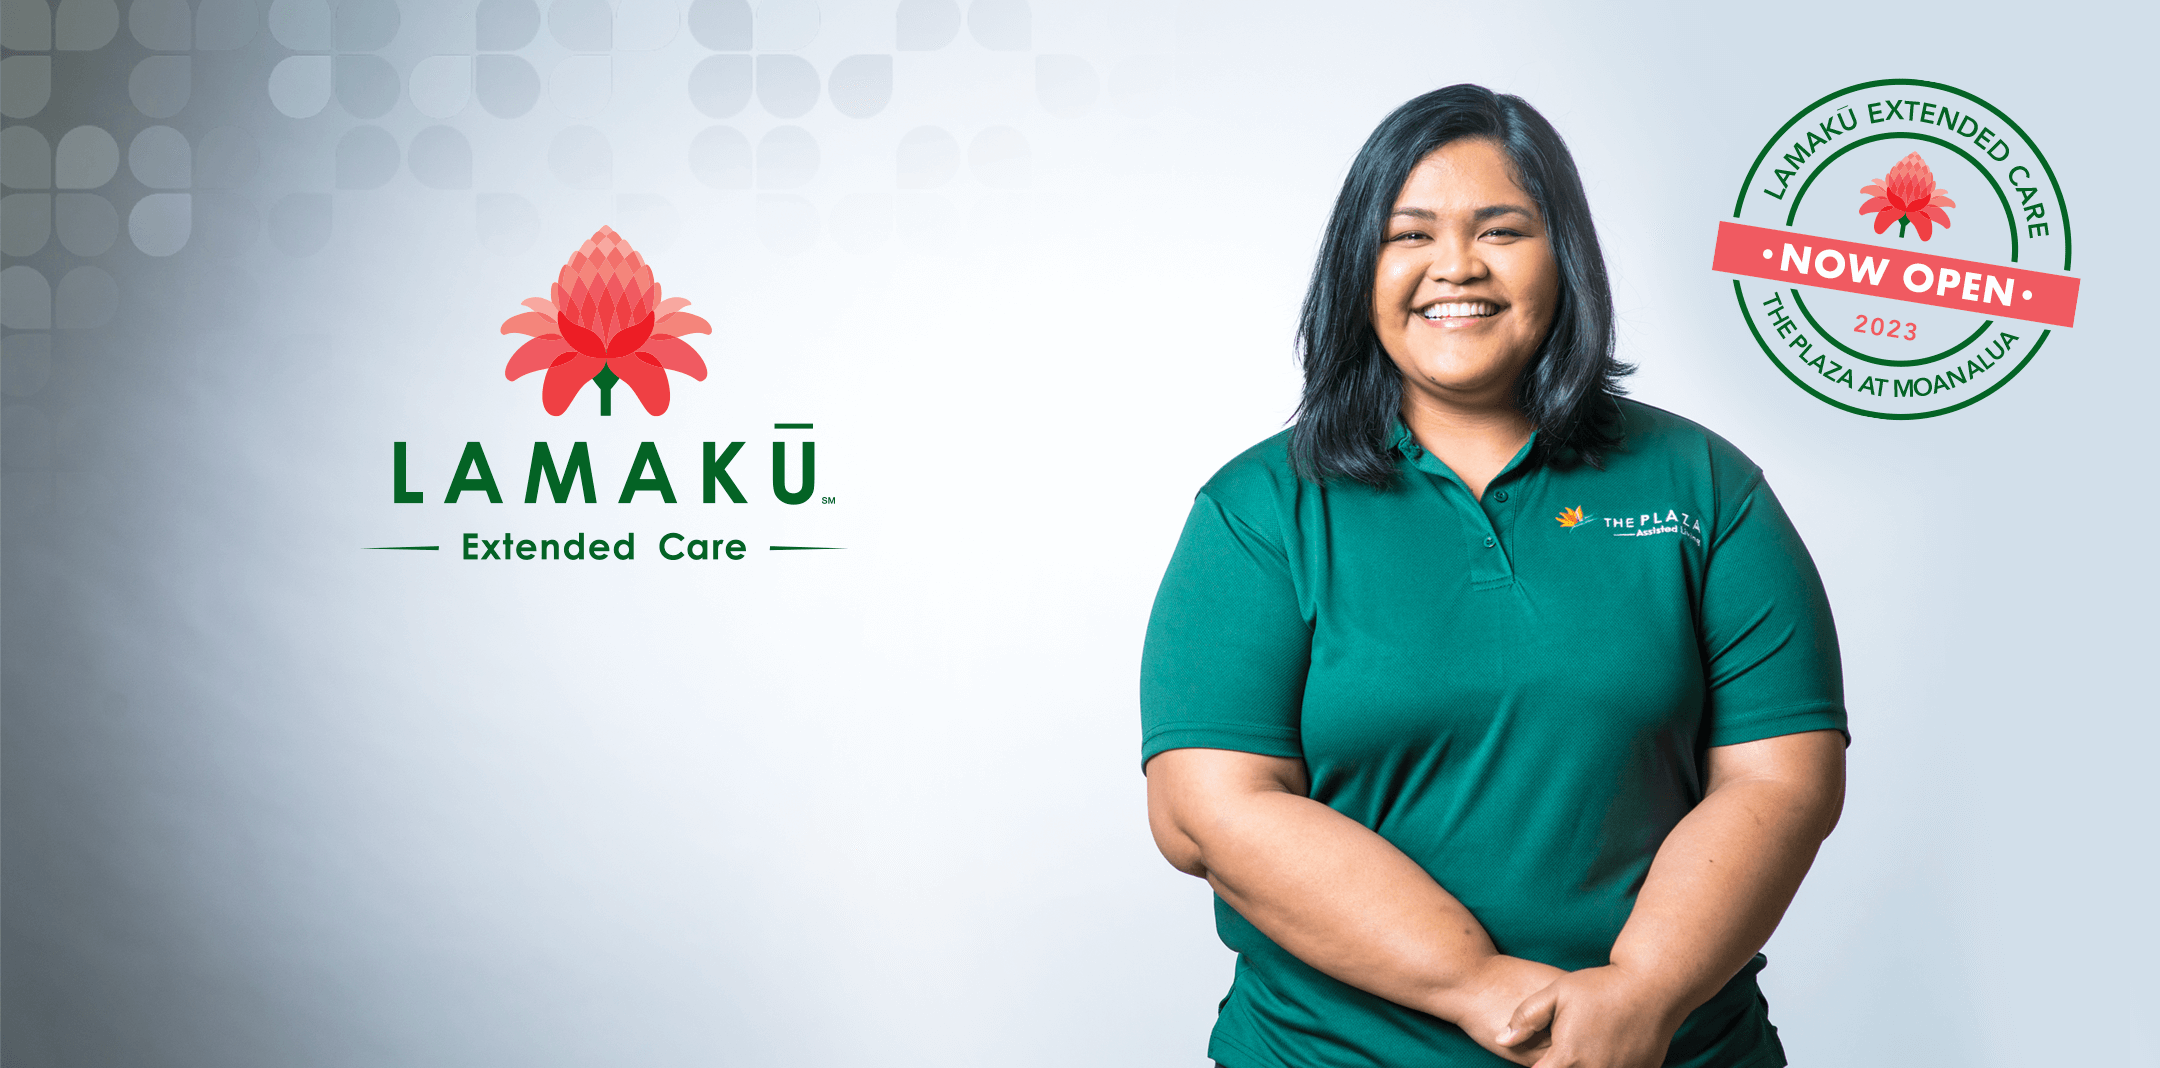 Lamaku Extended Care Coming Soon